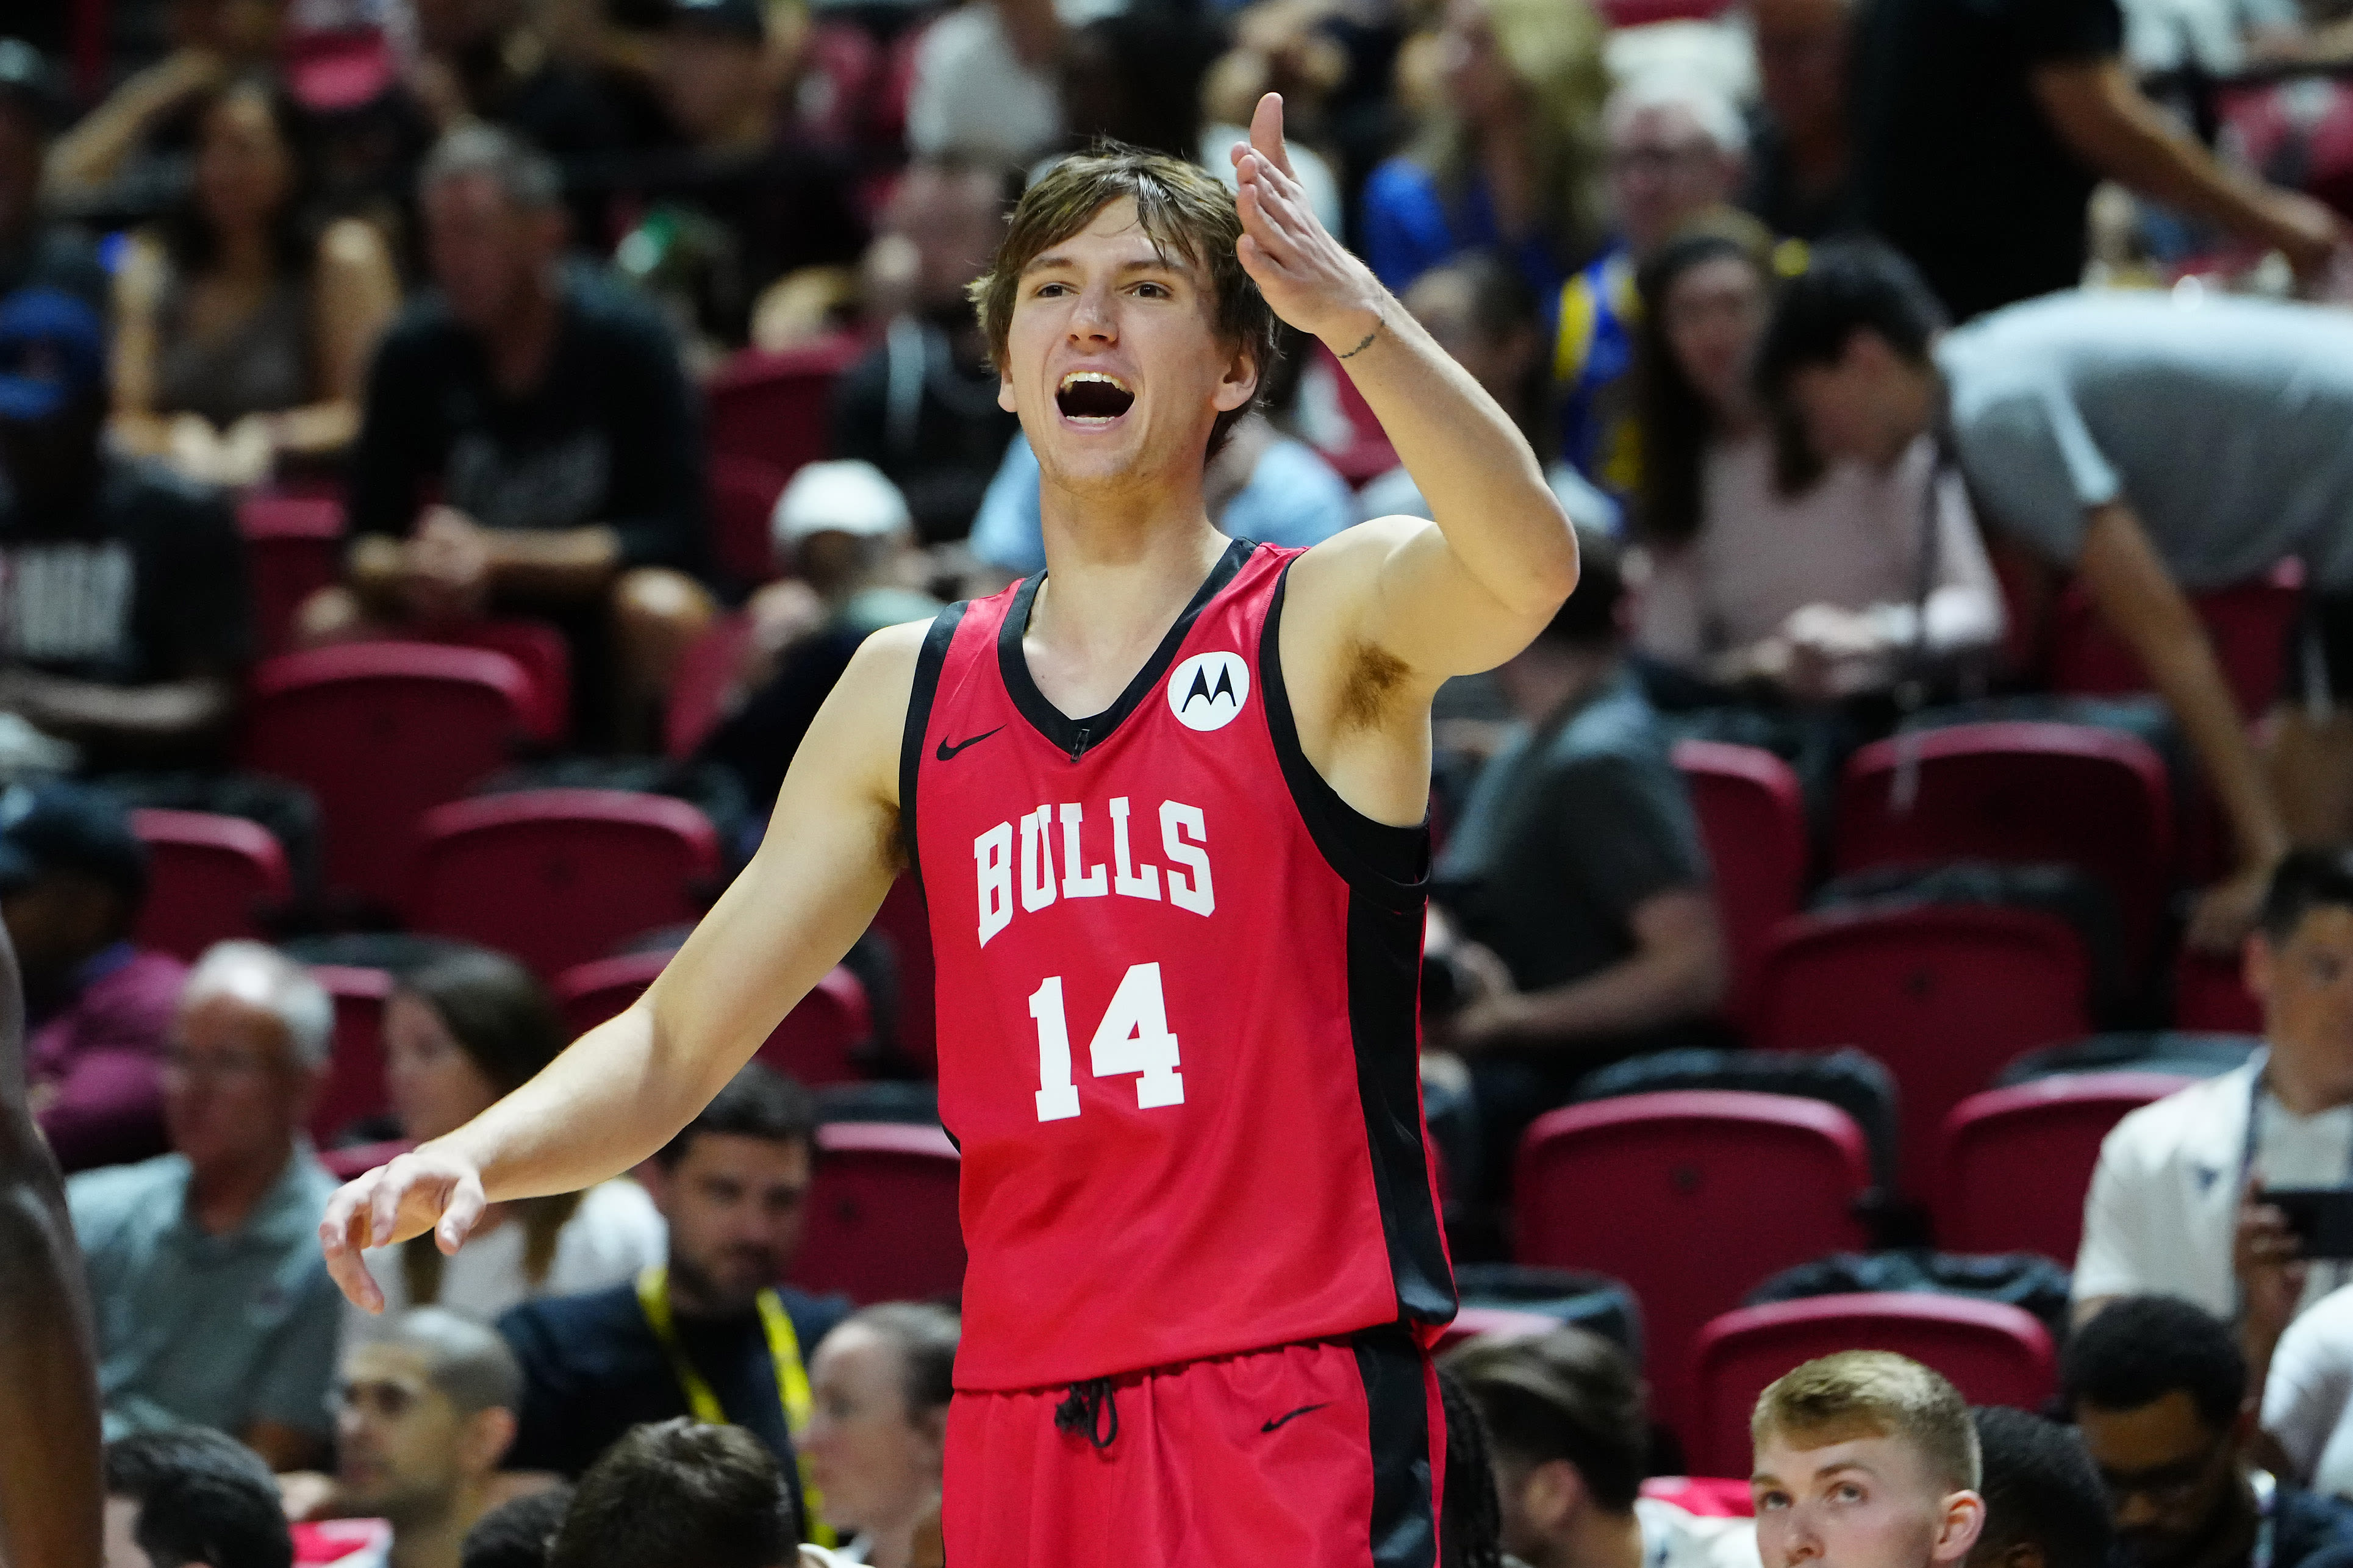 4 takeaways from Bulls' showing at NBA Summer League